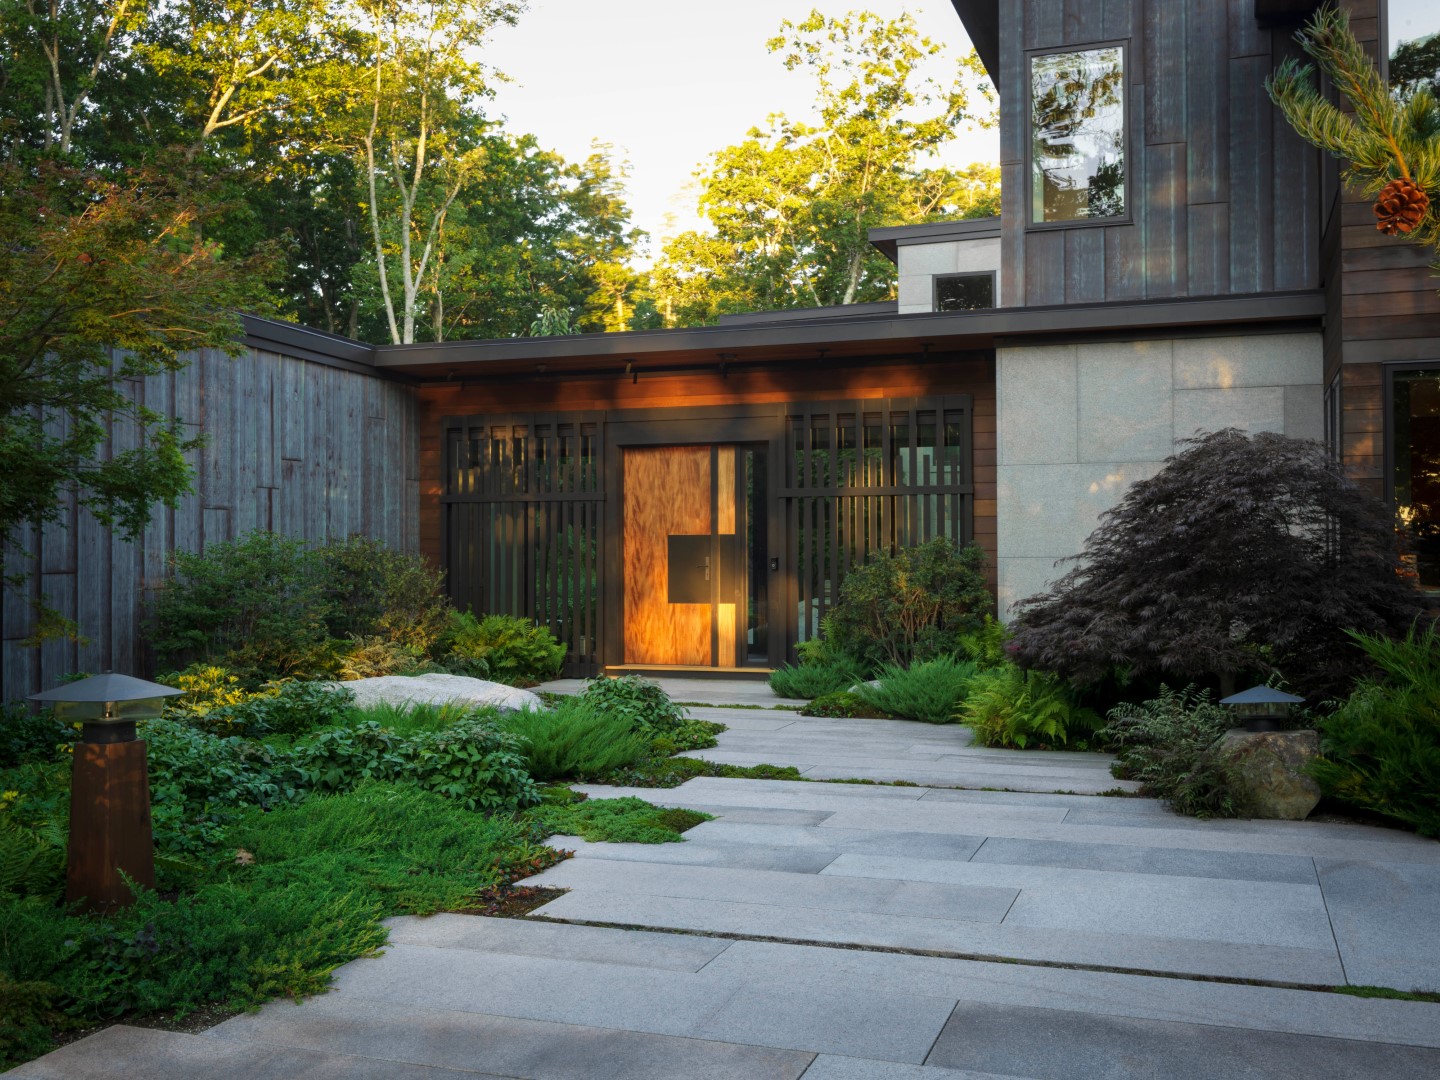 18 Captivating Contemporary Entrance Designs That Welcome in Style